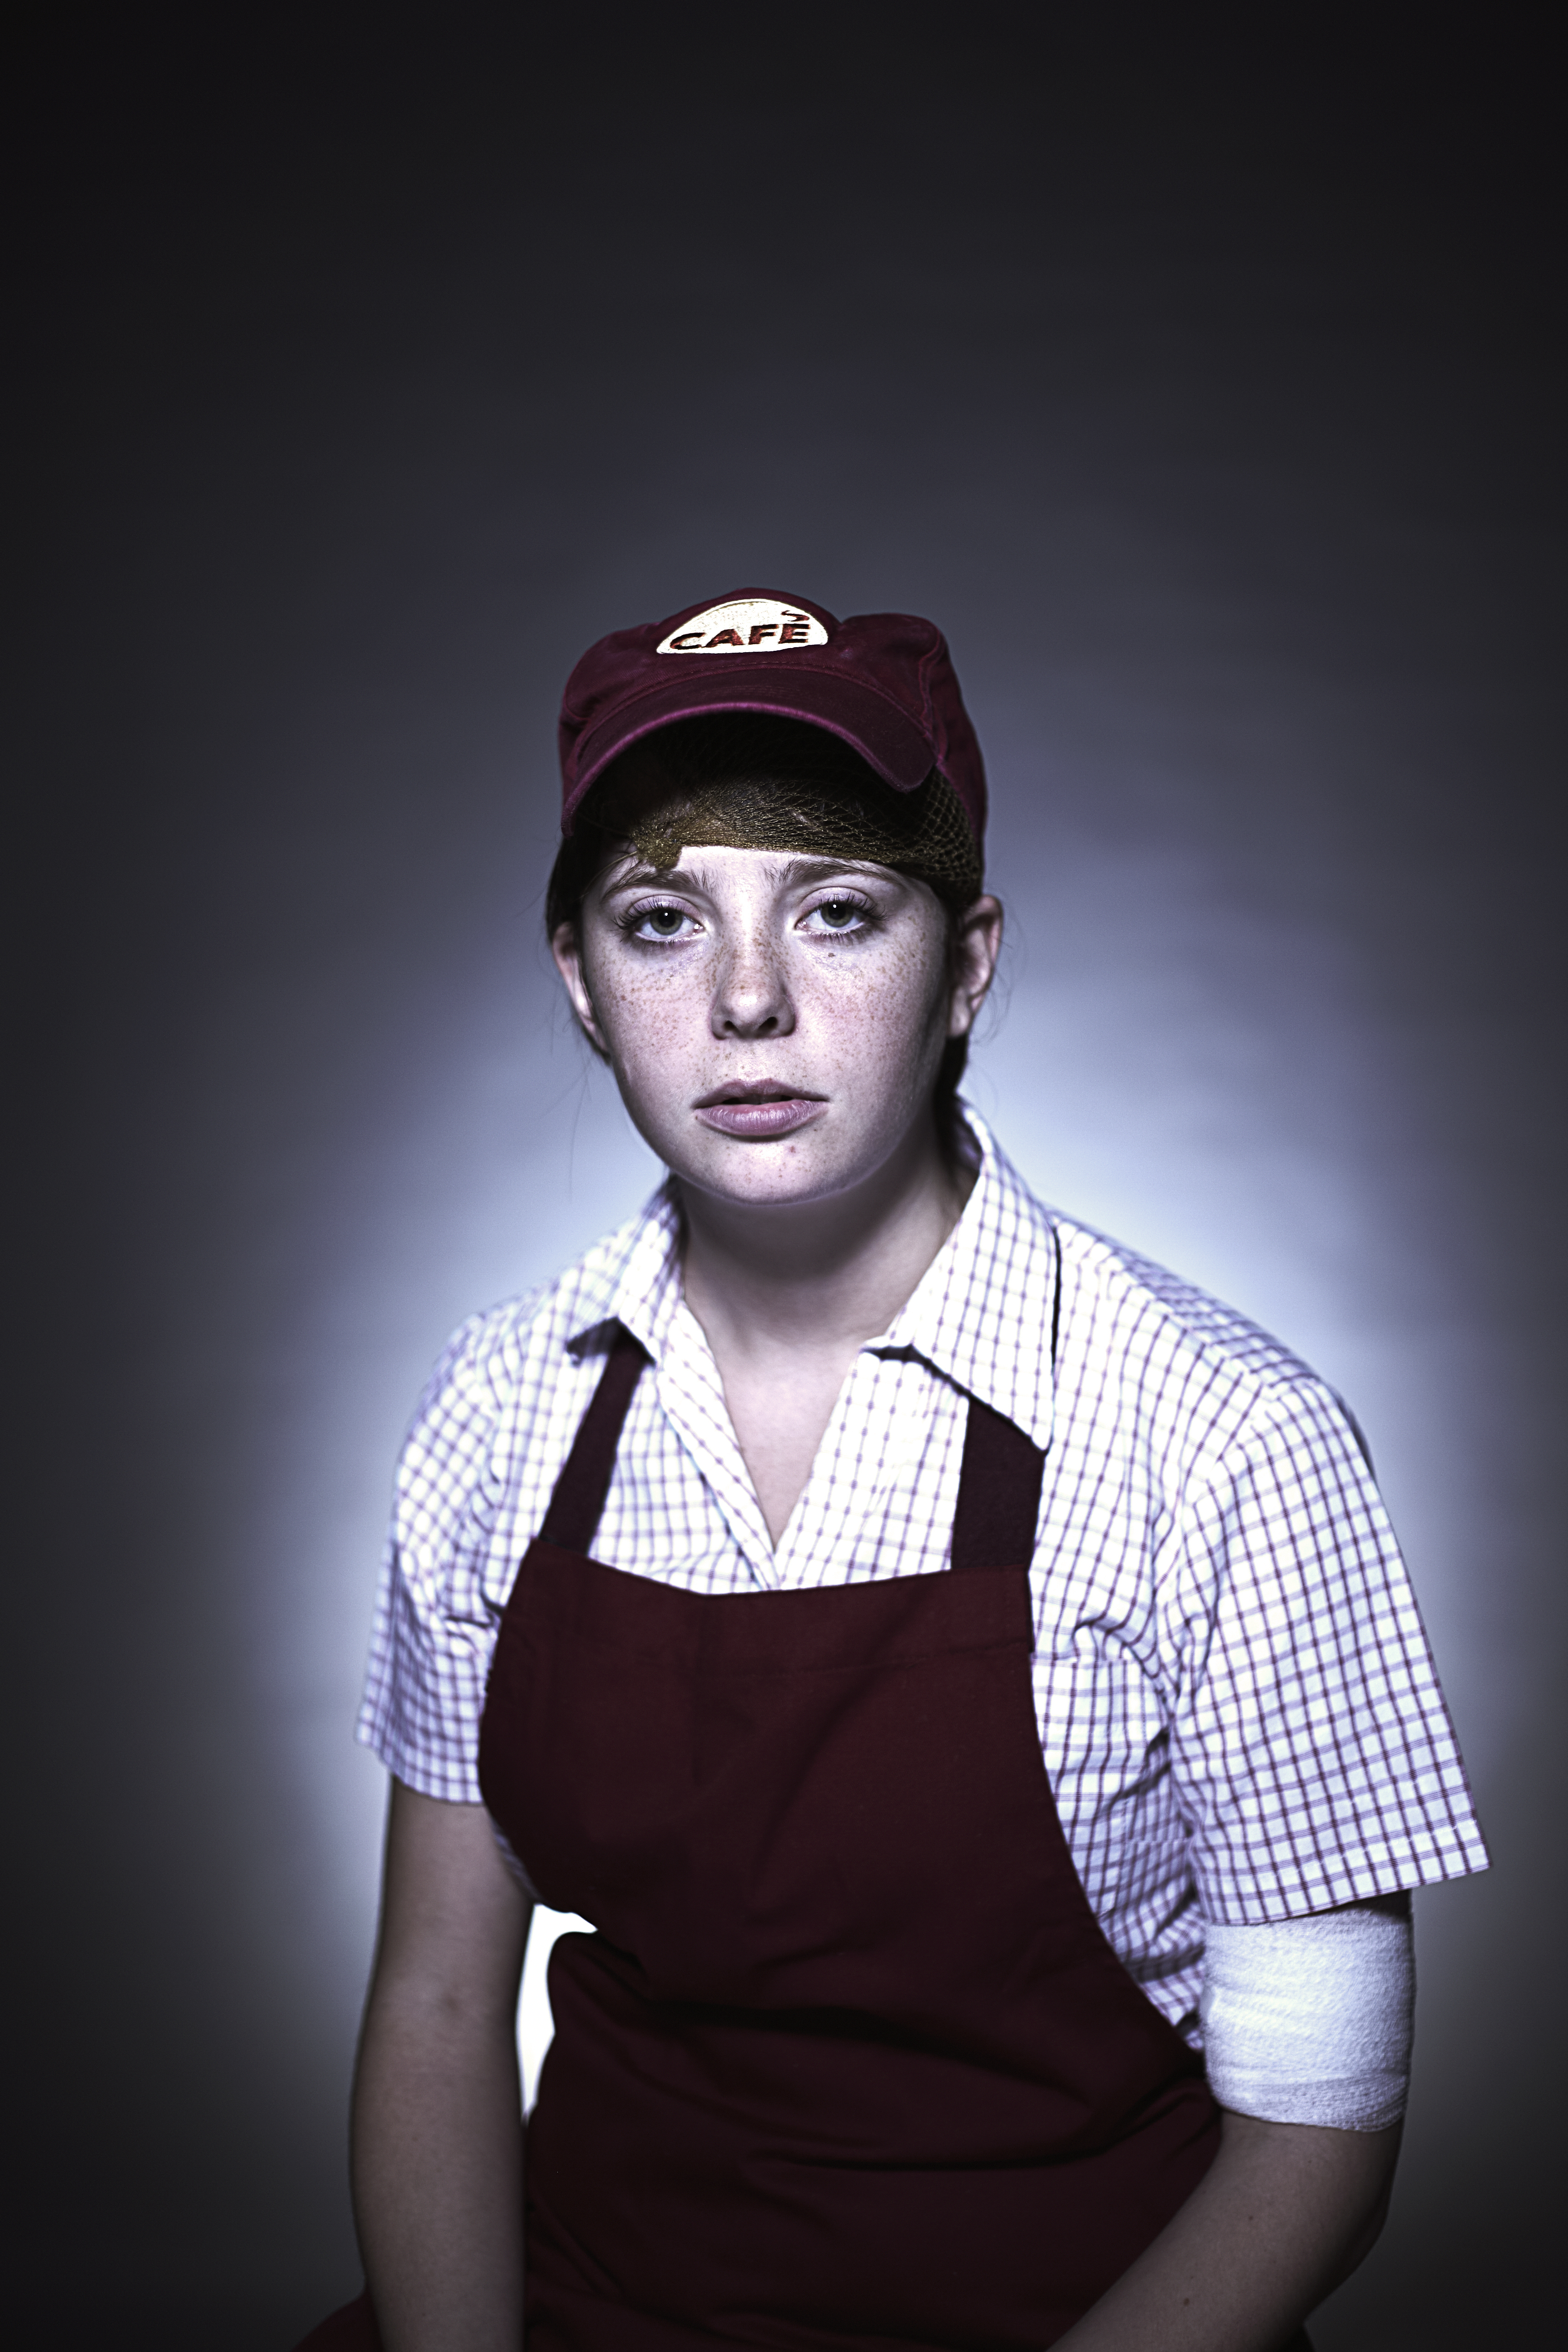 Portrait of a exhausted female cafe worker (Jamie Garbutt&mdash;Getty Images)